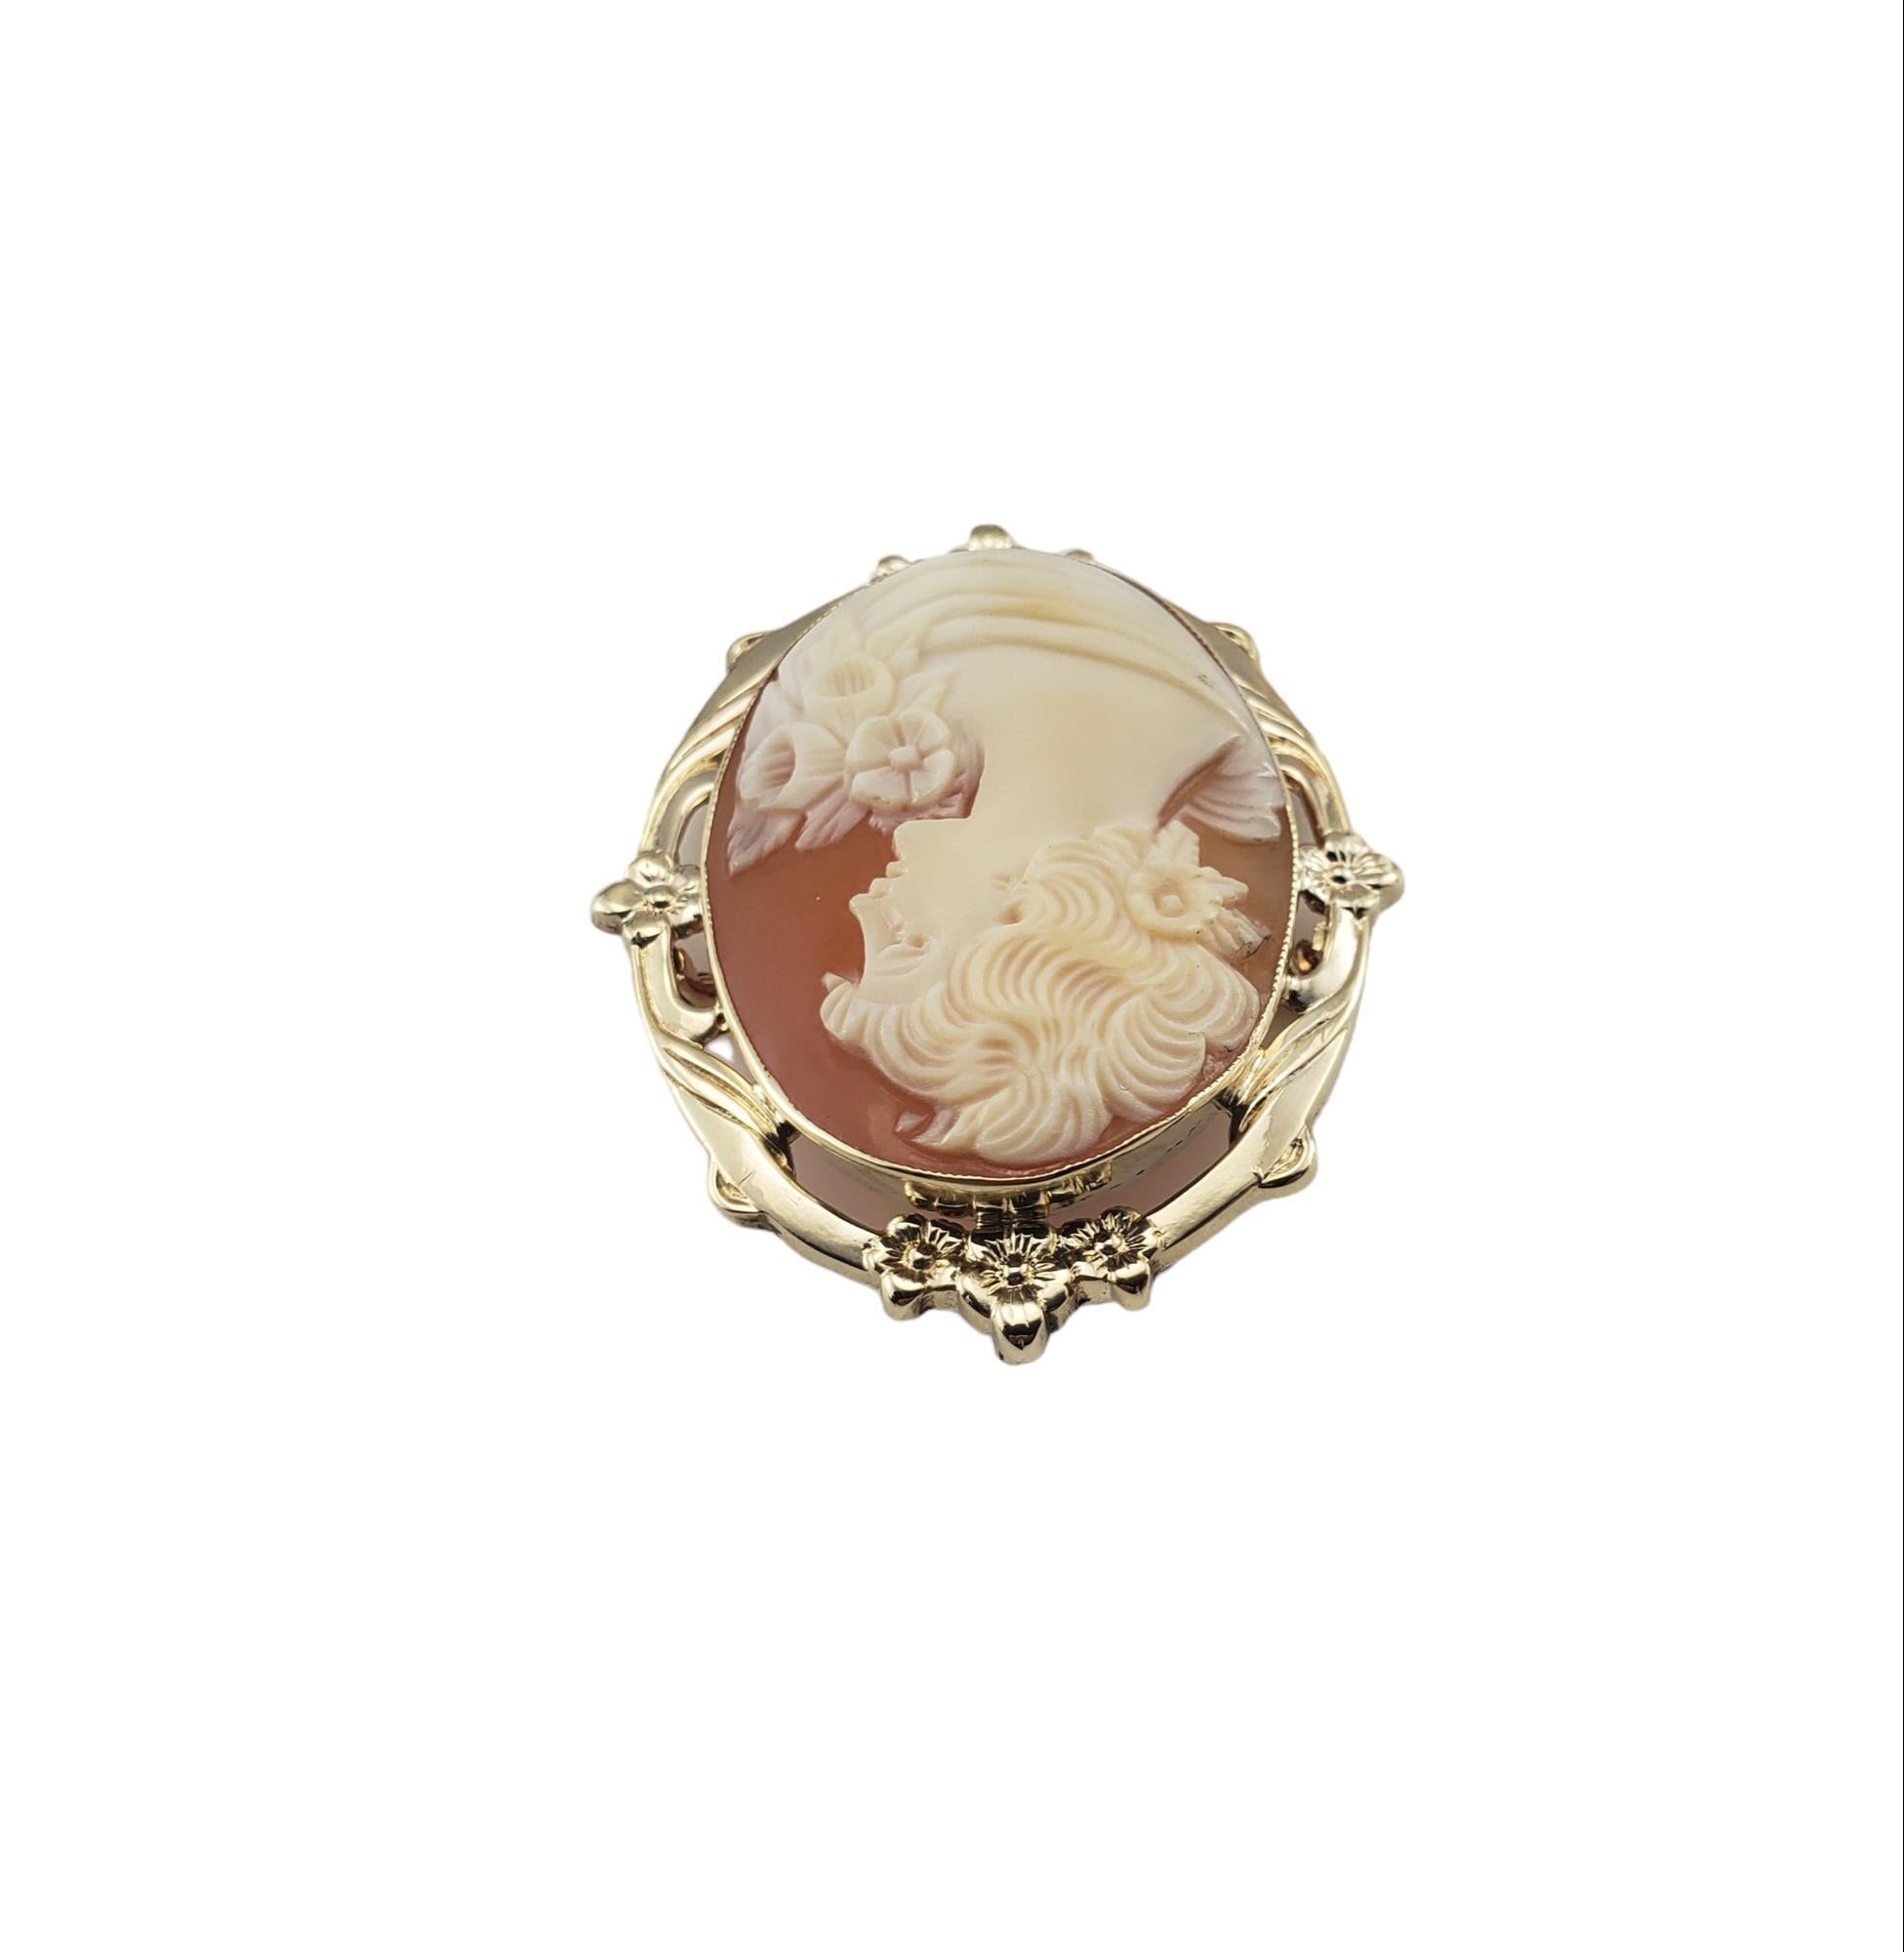 Vintage 10 Karat Yellow Gold Cameo Brooch/Pendant #15311 For Sale 1